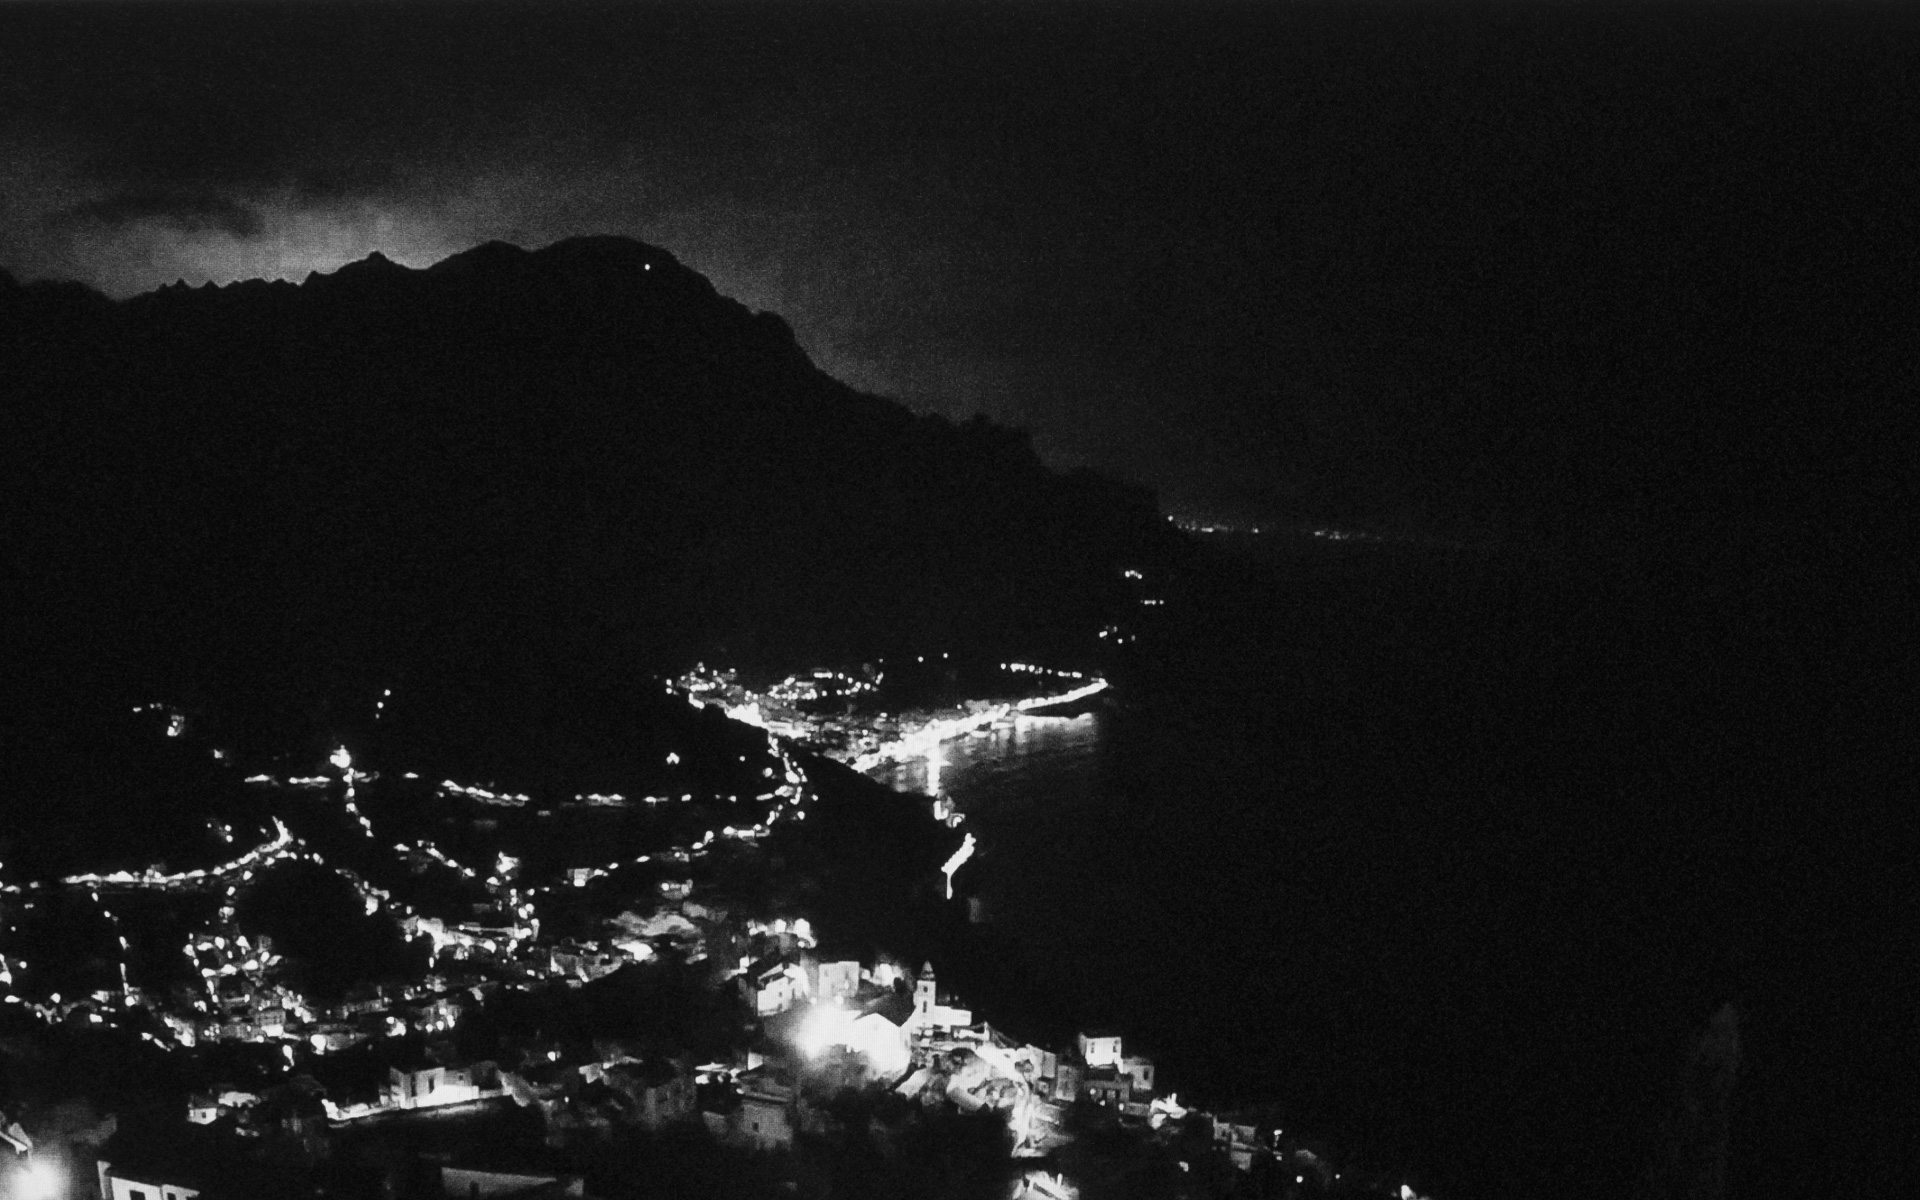 Ravello, Amalfi coast - Perched on a hilltop more than 1200 feet (~365 meters) above the Mediterranean Ravello is far removed from the crowds. Nevertheless, now it is covered by the strange darkness. Ravello, Province Salerno, March 26. 2020.